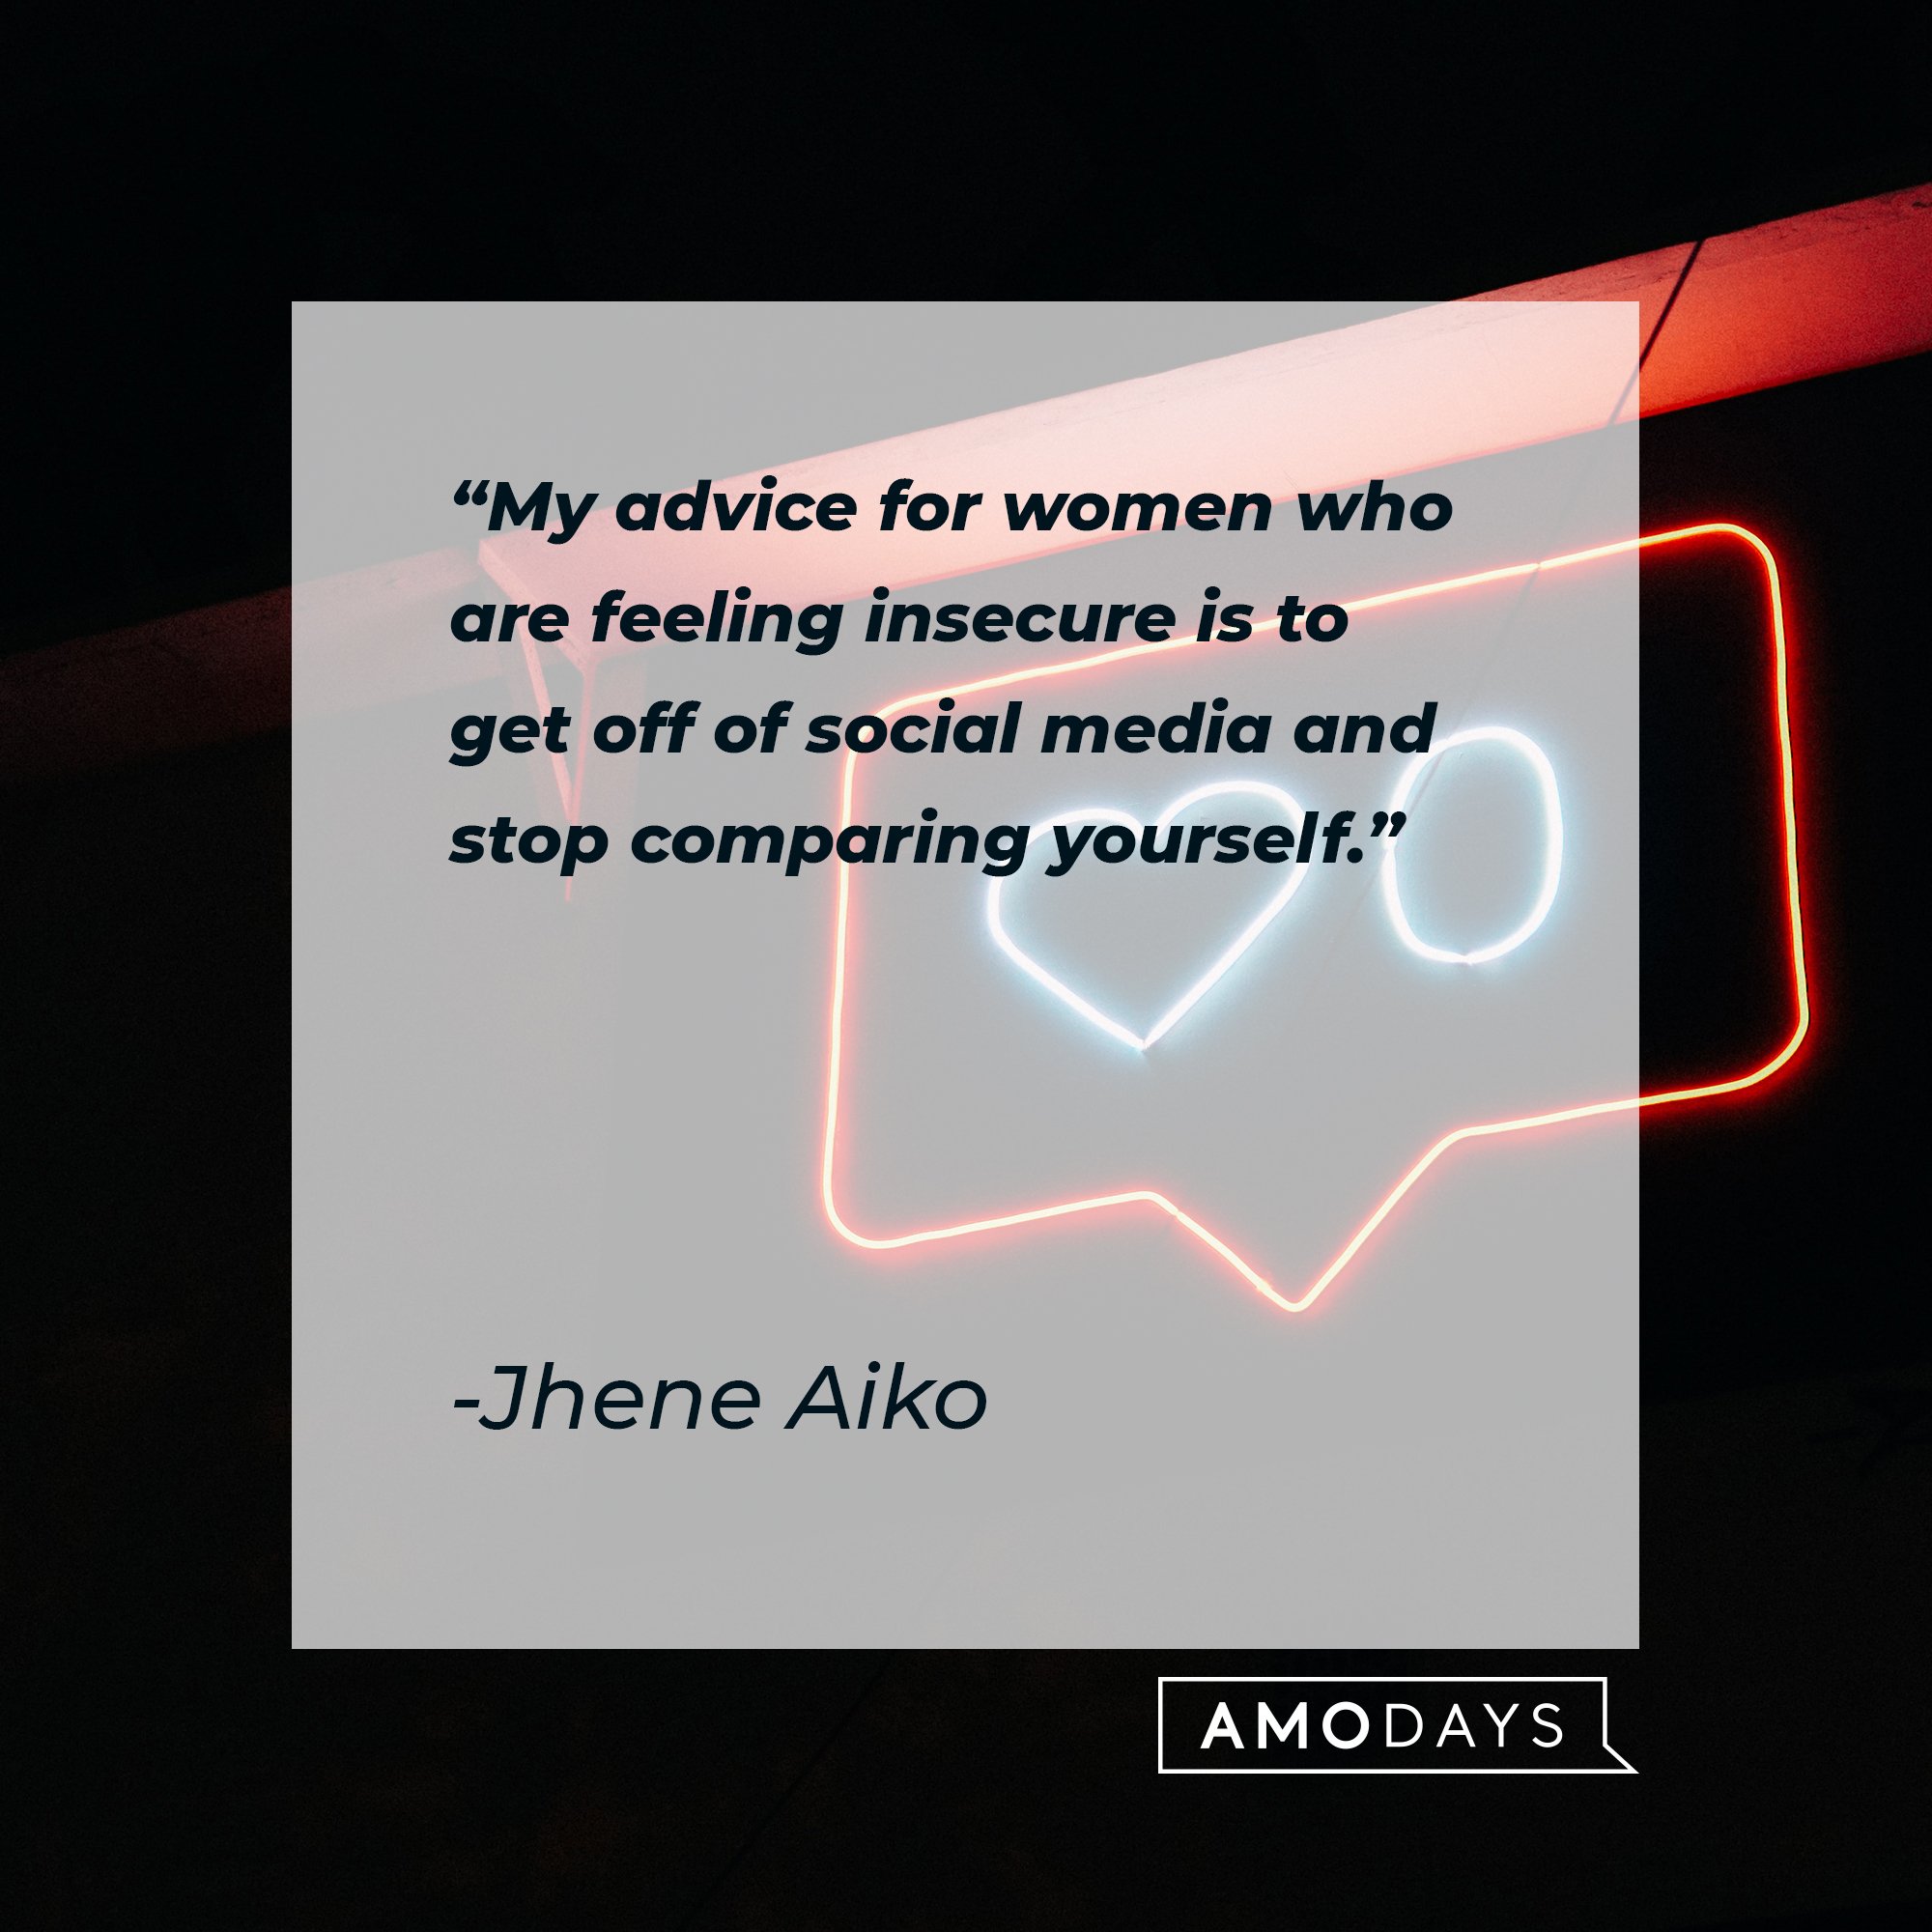  Jhene Aiko's quote: "My advice for women who are feeling insecure is to get off of social media and stop comparing yourself." | Image: AmoDays